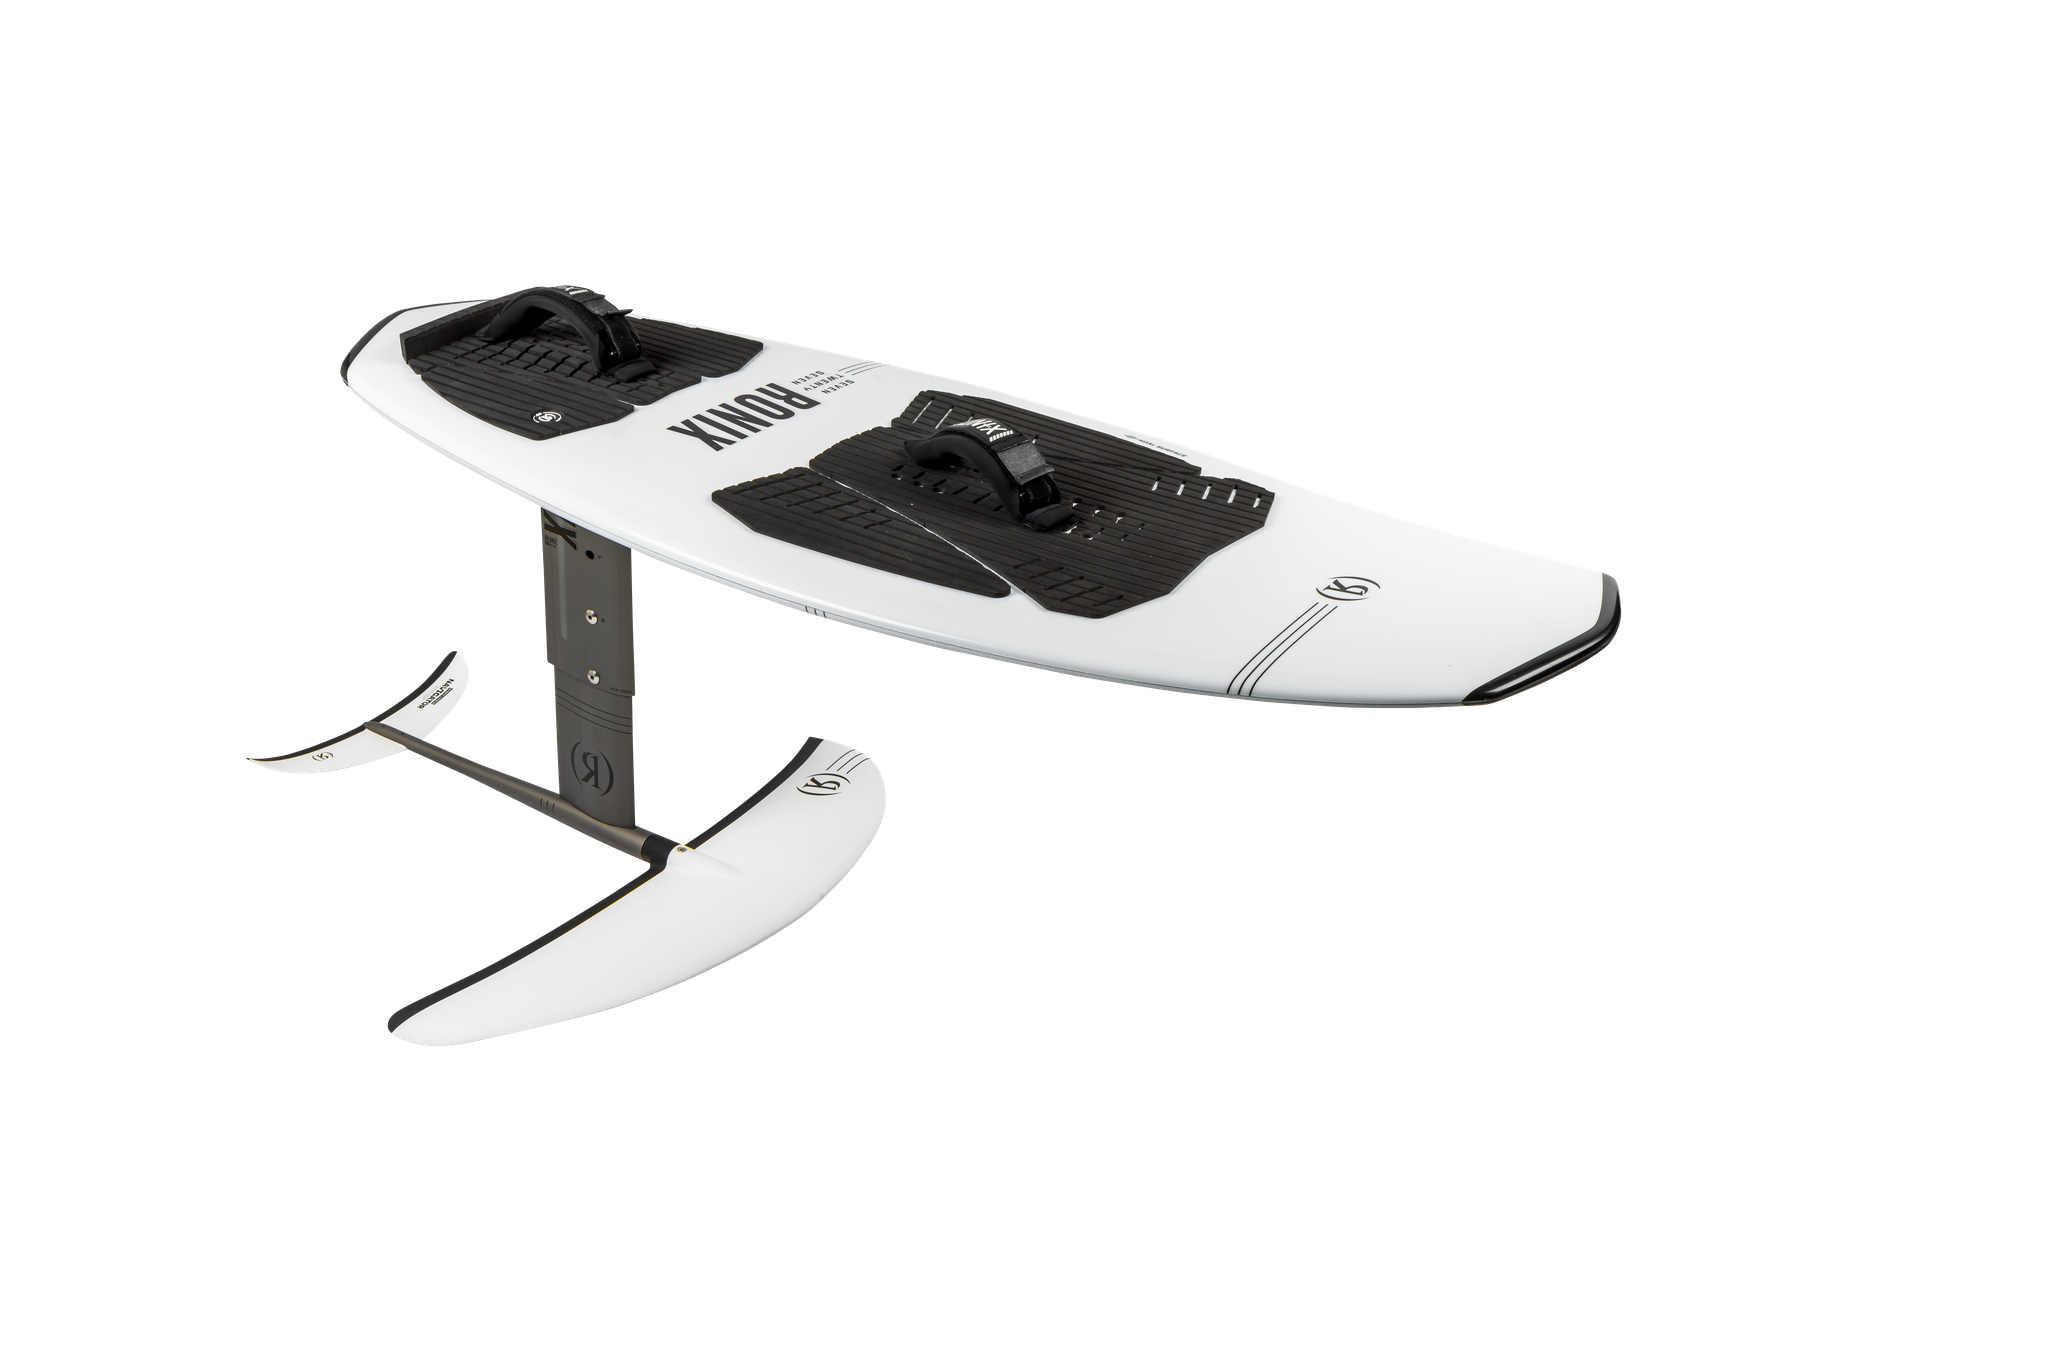 A white and black Ronix Koal Surface 727 Foil | Beginner-Intermediate Hybrid Series surfboard with a front wing, designed for foiling, on a black background.